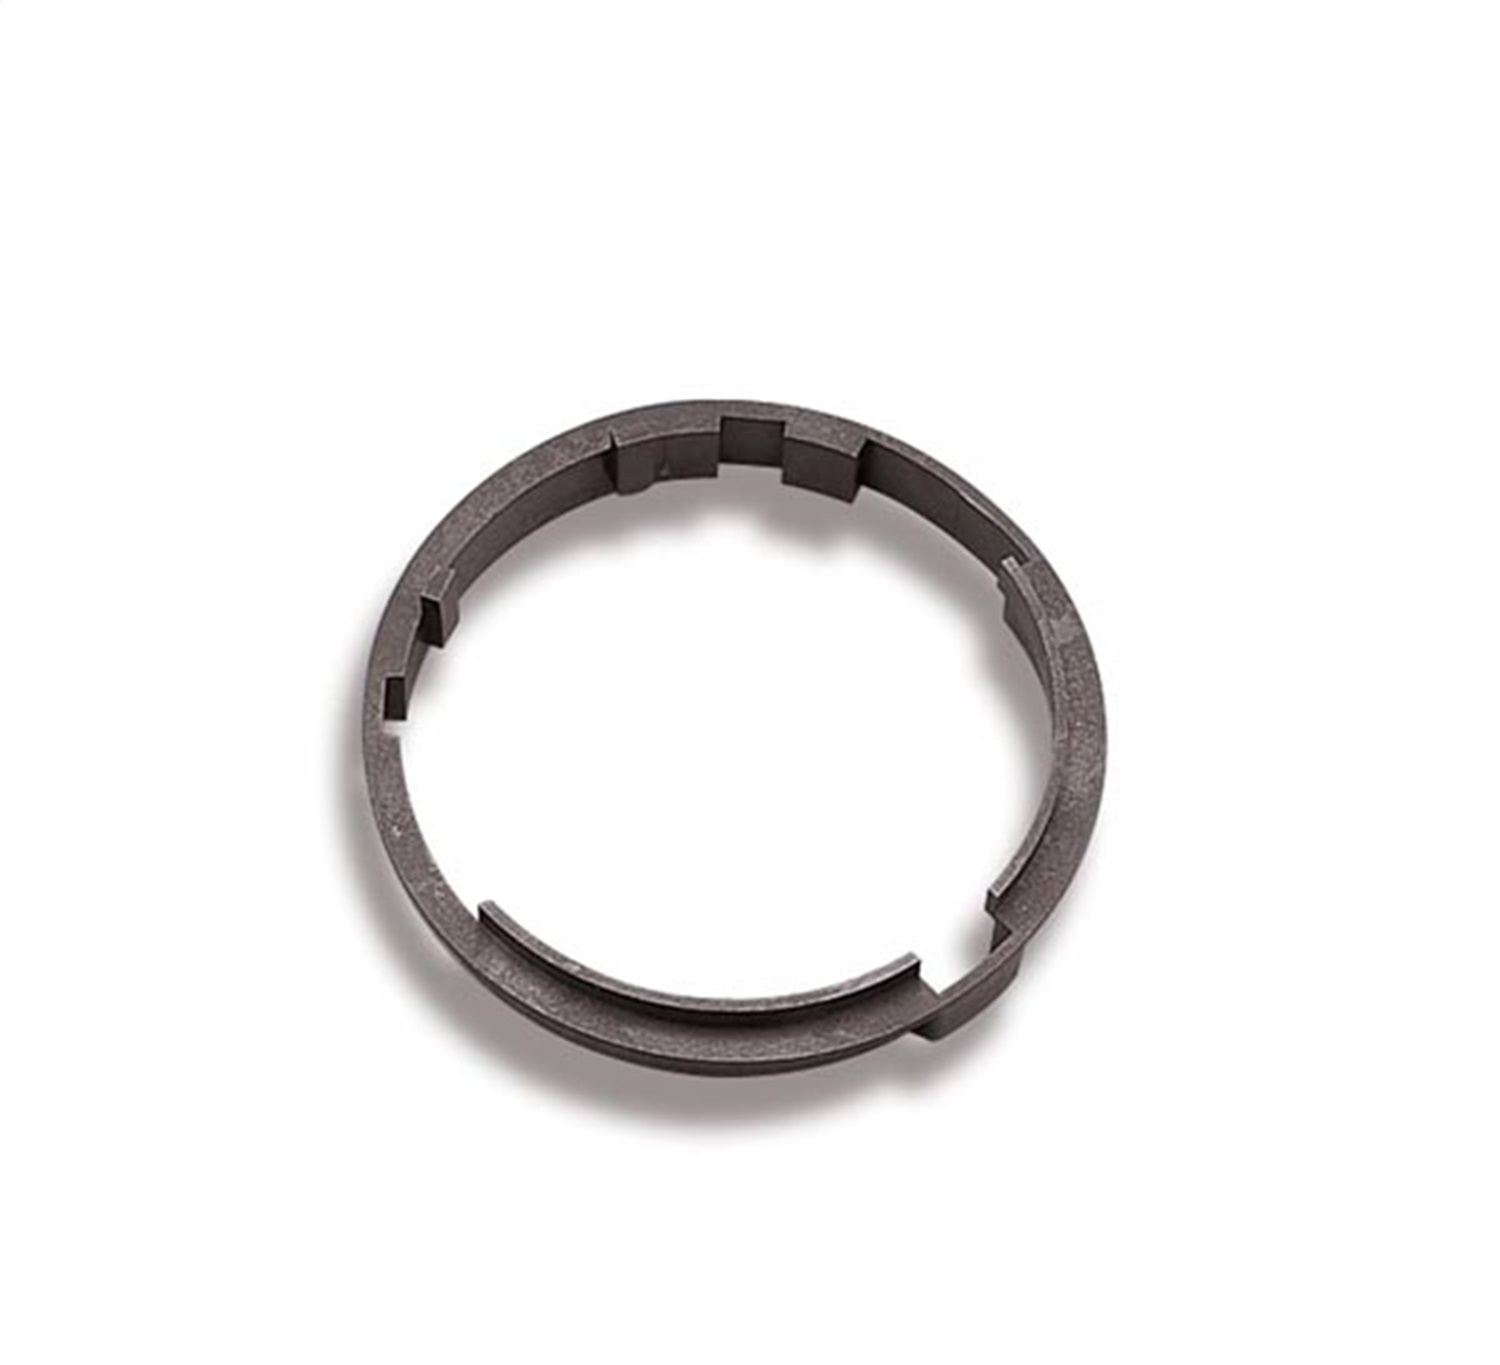 Holley Performance Holley Performance 17-14 Air Cleaner Spacer